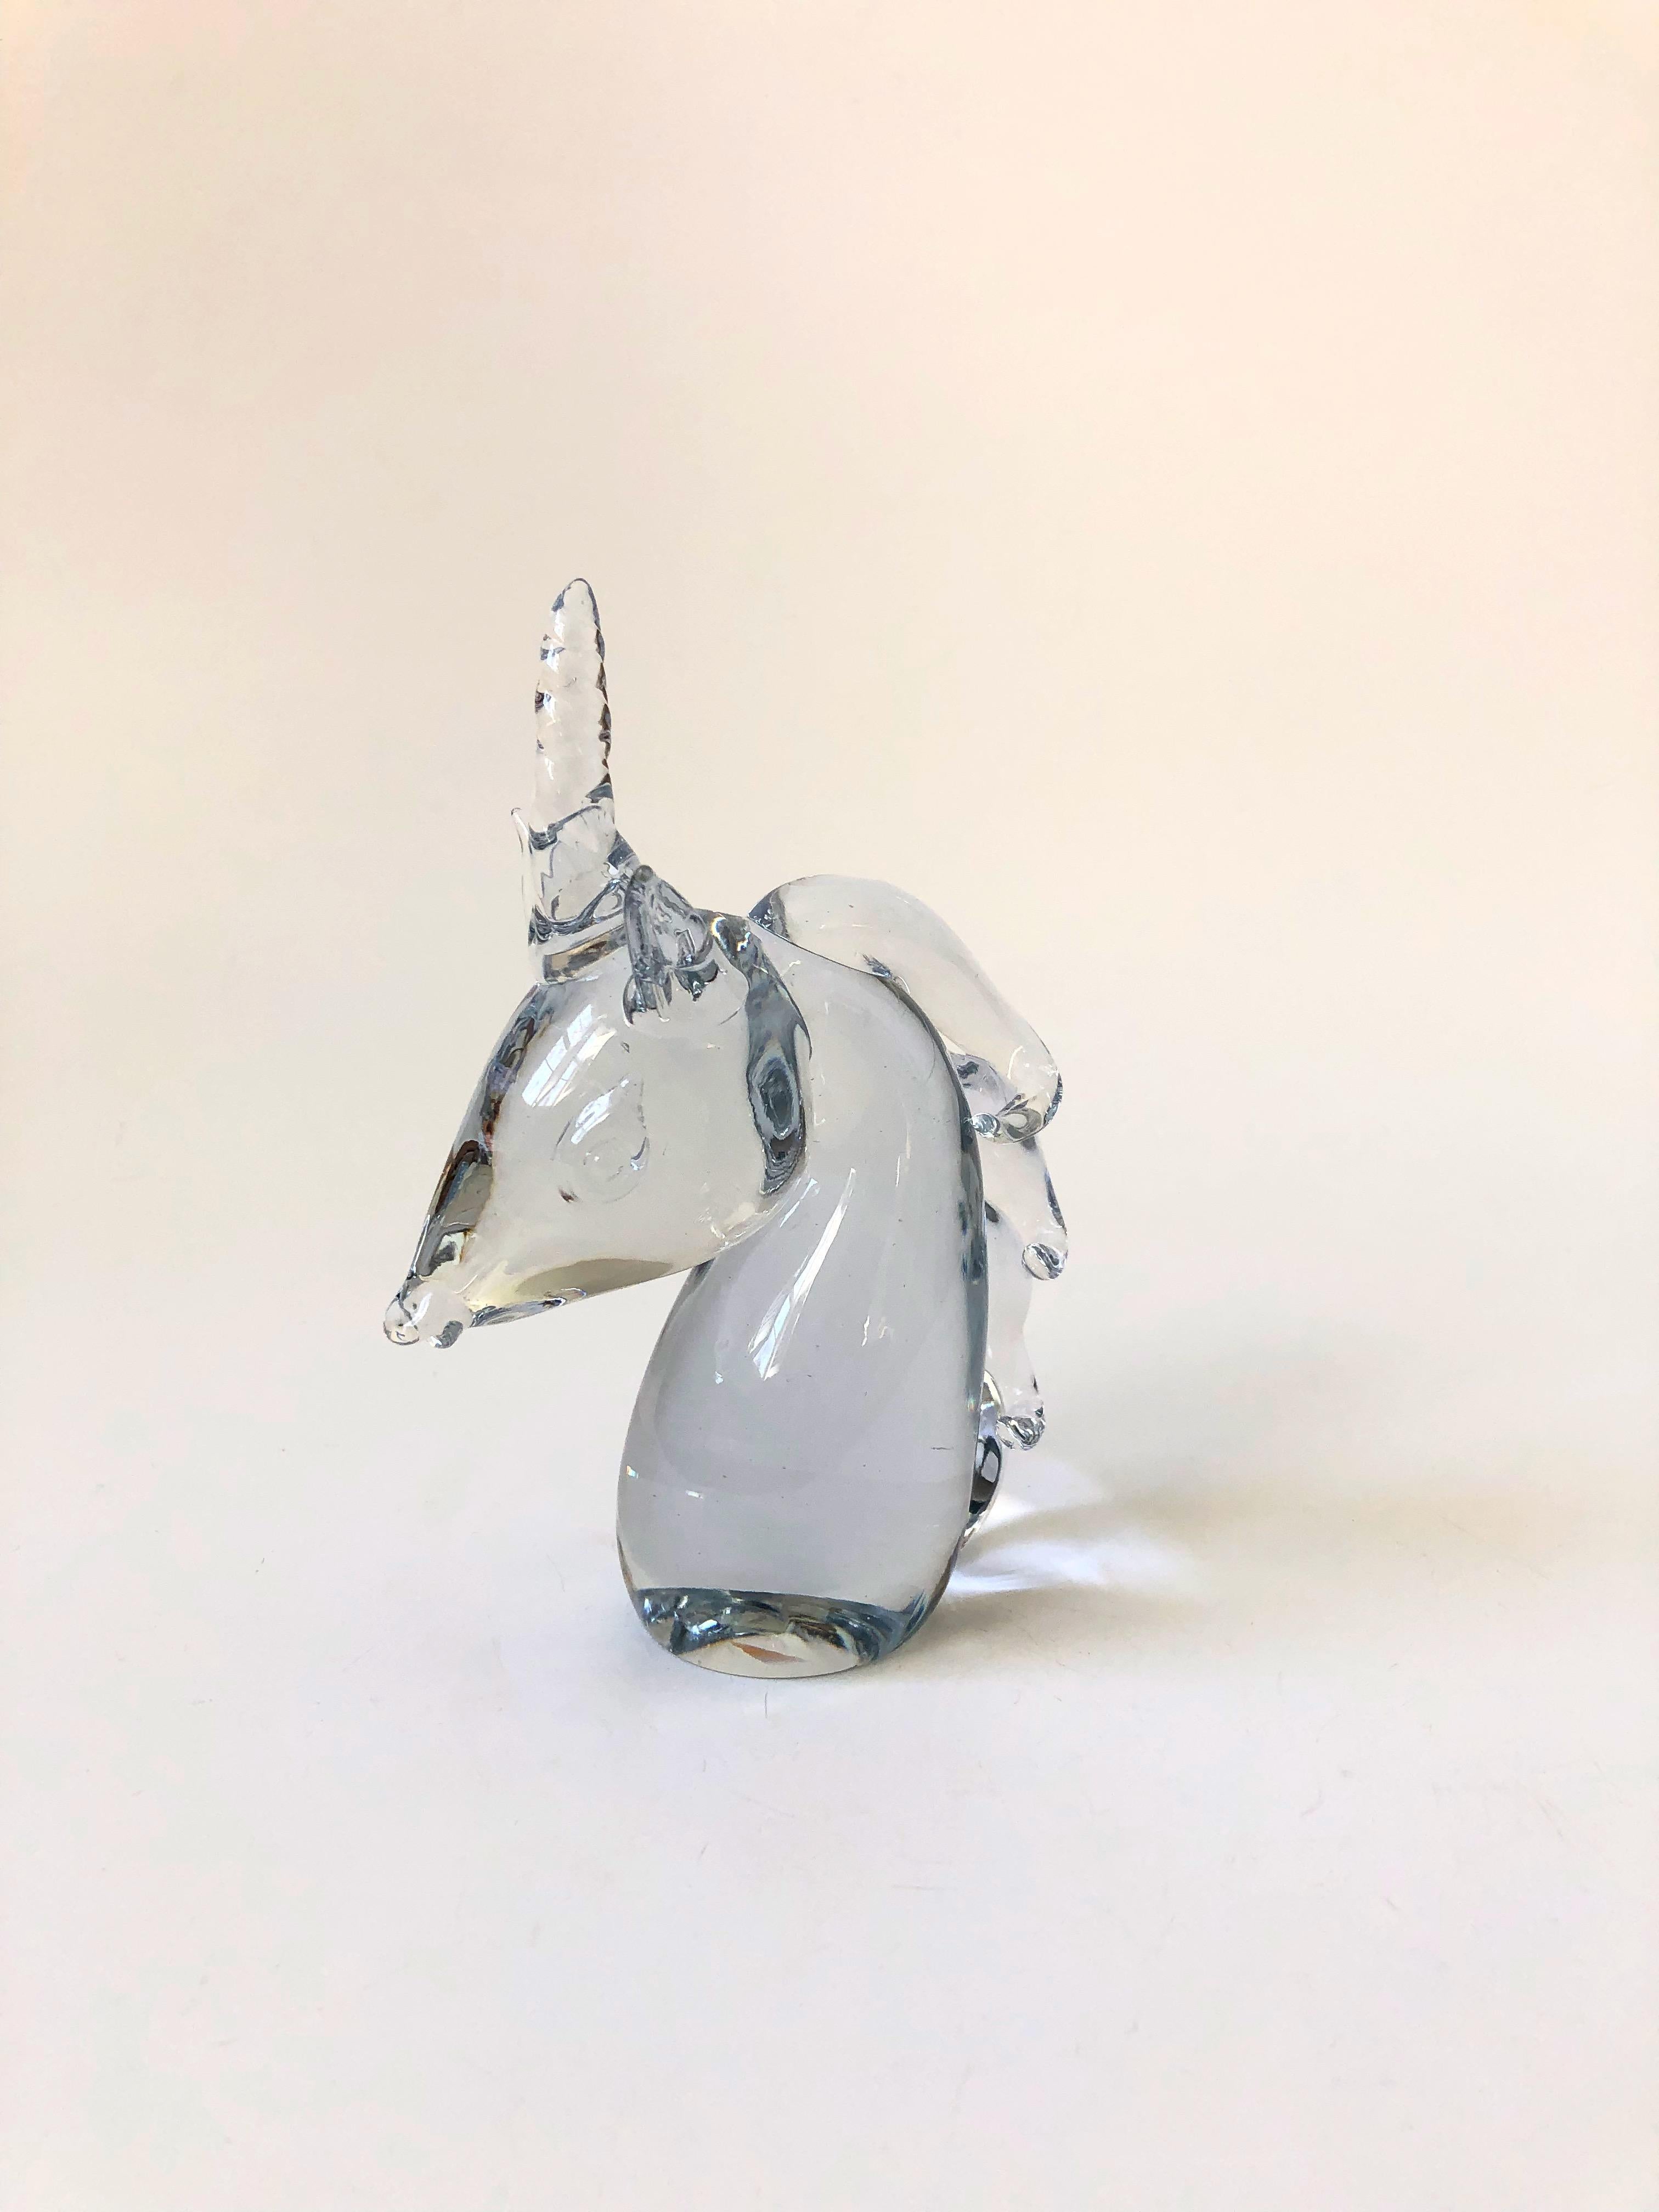 A sweet vintage blown art glass unicorn head. A great small decorative item or paperweight. Made in Taiwan for Great City Traders of San Francisco.
   